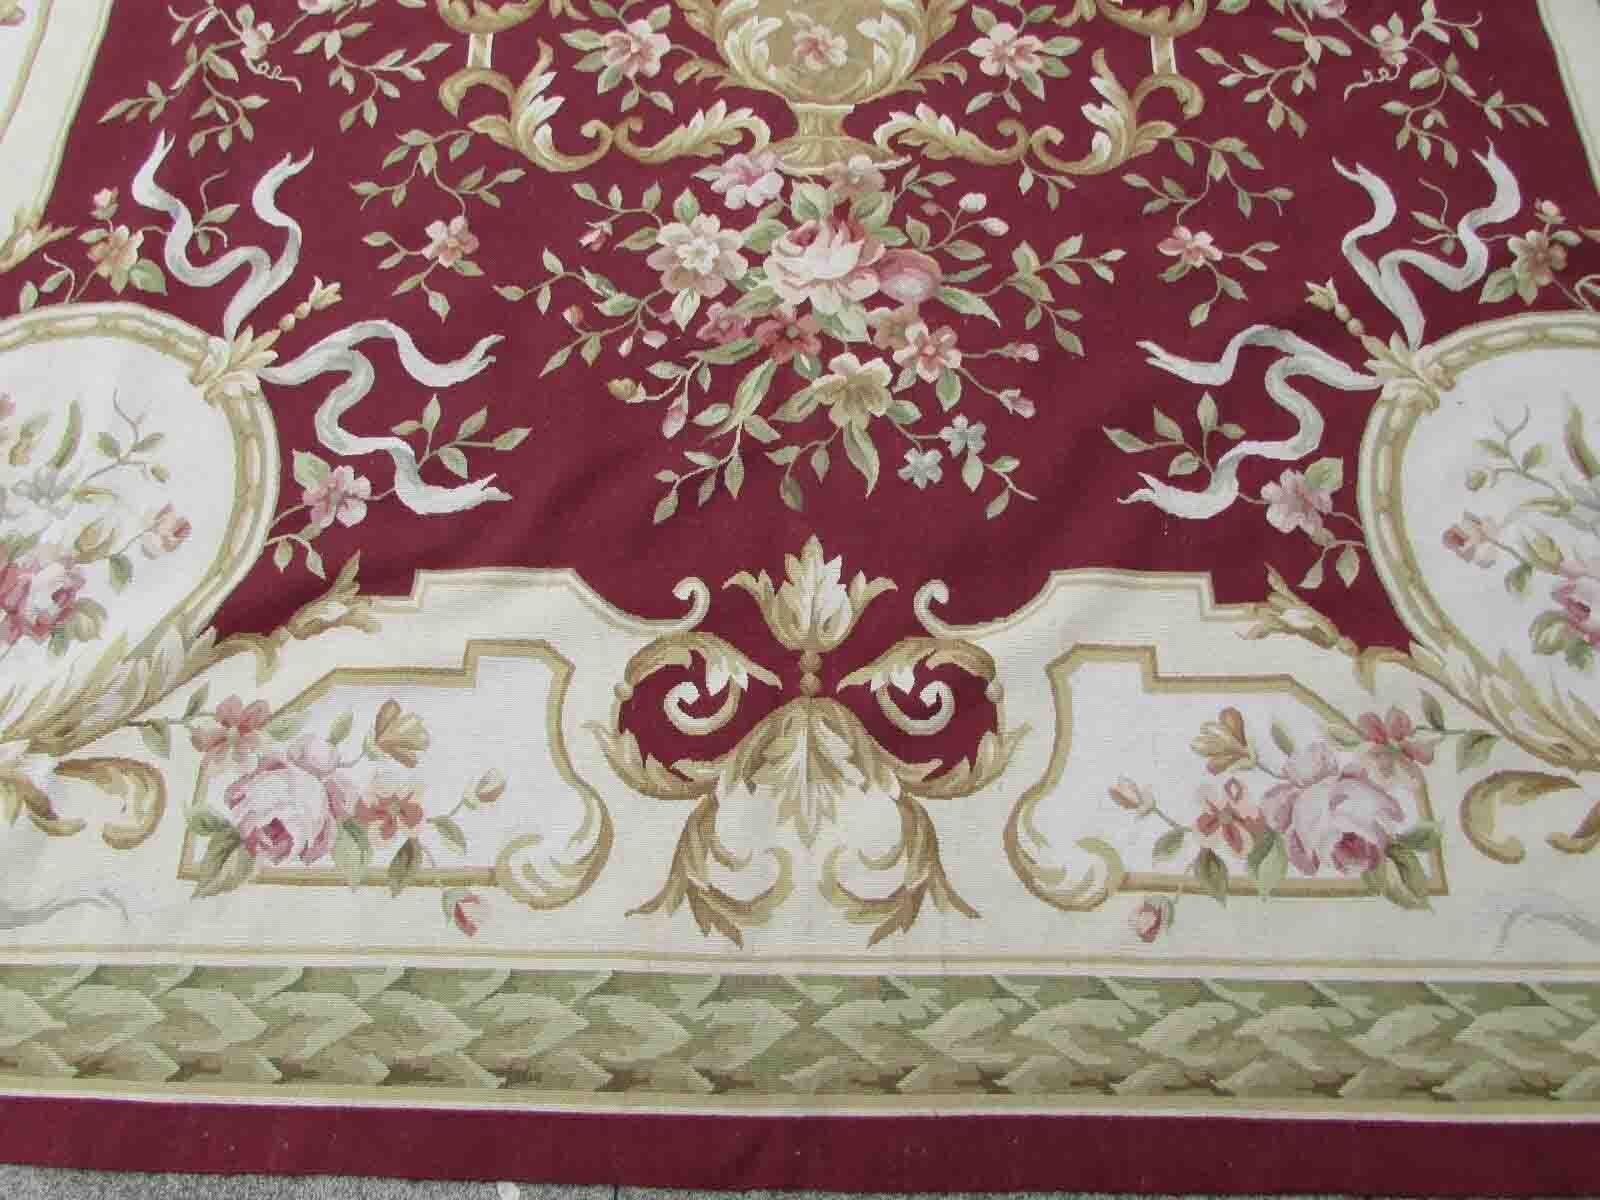 Handmade vintage French Aubusson rug in traditional floral design in burgundy and beige shades. This rug has been made in the end of 20th century and in original good condition.

-condition: Original good,

-circa: 1970s,

-Size: 9' x 11.9'